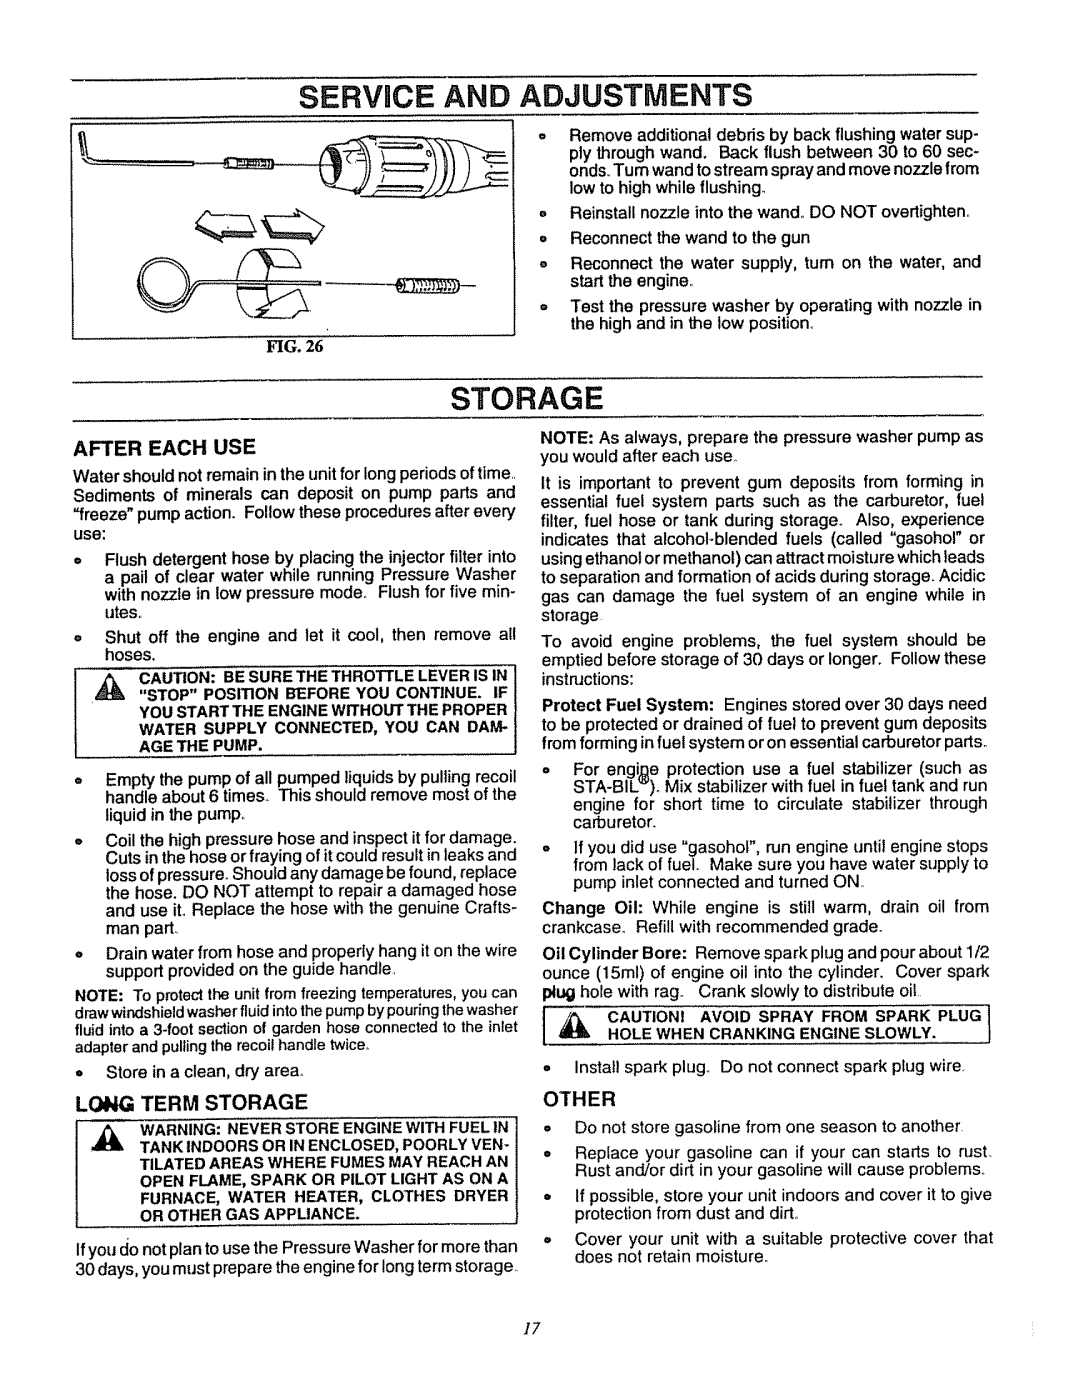 Sears 580.7515 manual Other, Service And Adjustments, After Each Use, Long Term Storage, Fig 